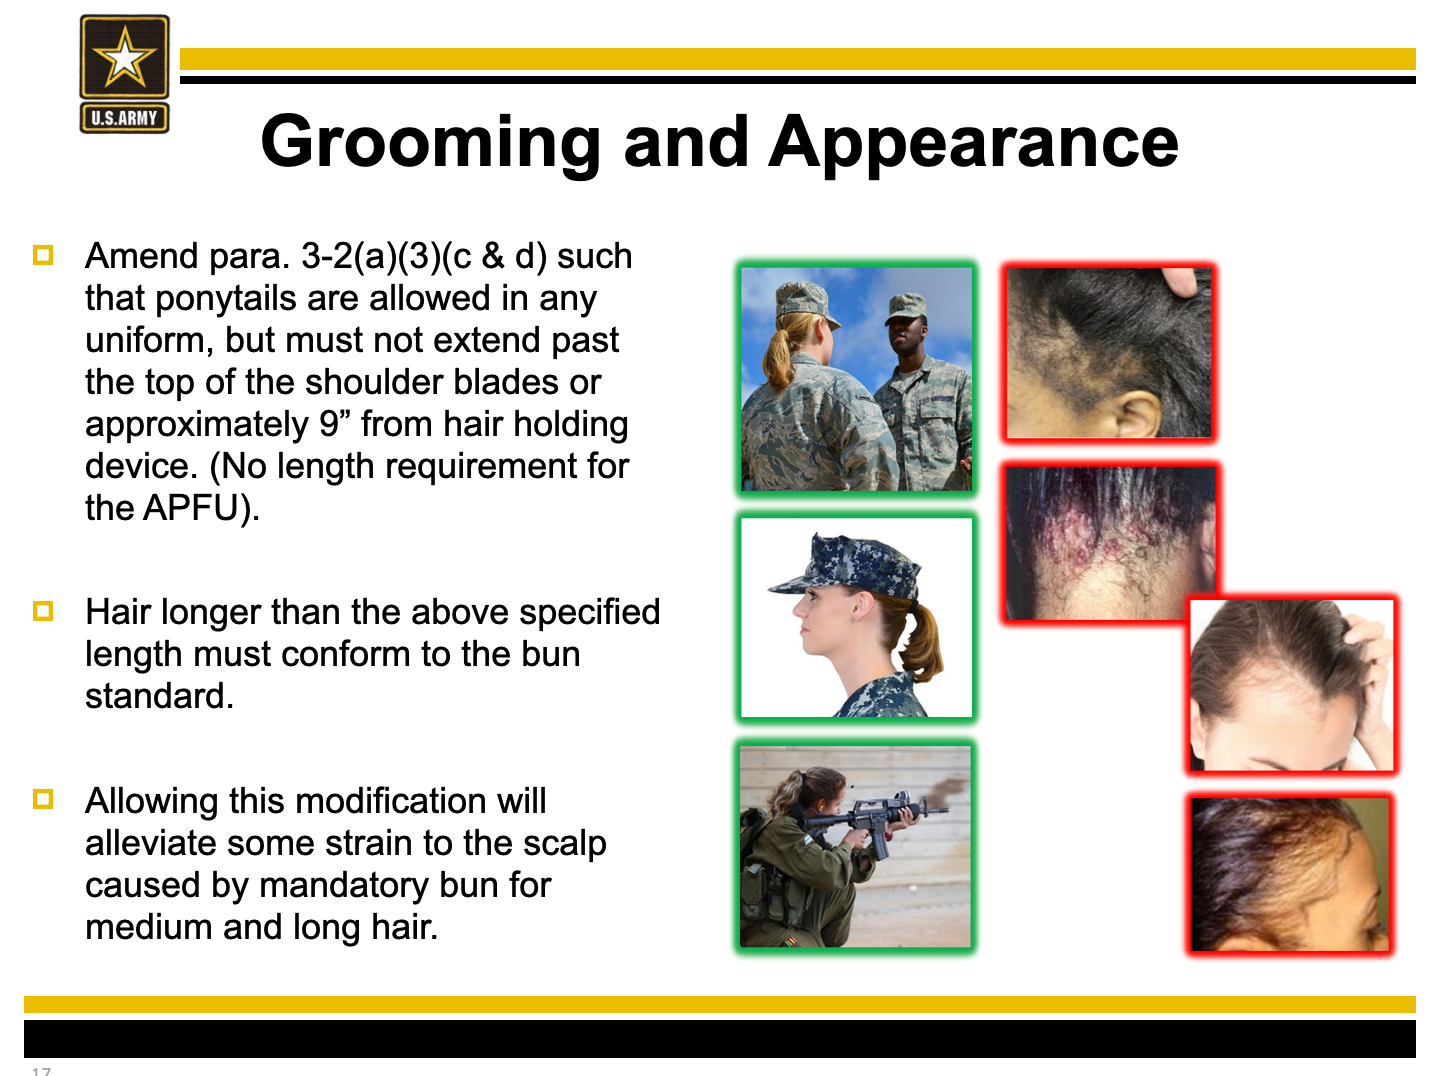 Army Regulation 670-1: Nail Color and Grooming Standards for Female Soldiers - wide 9